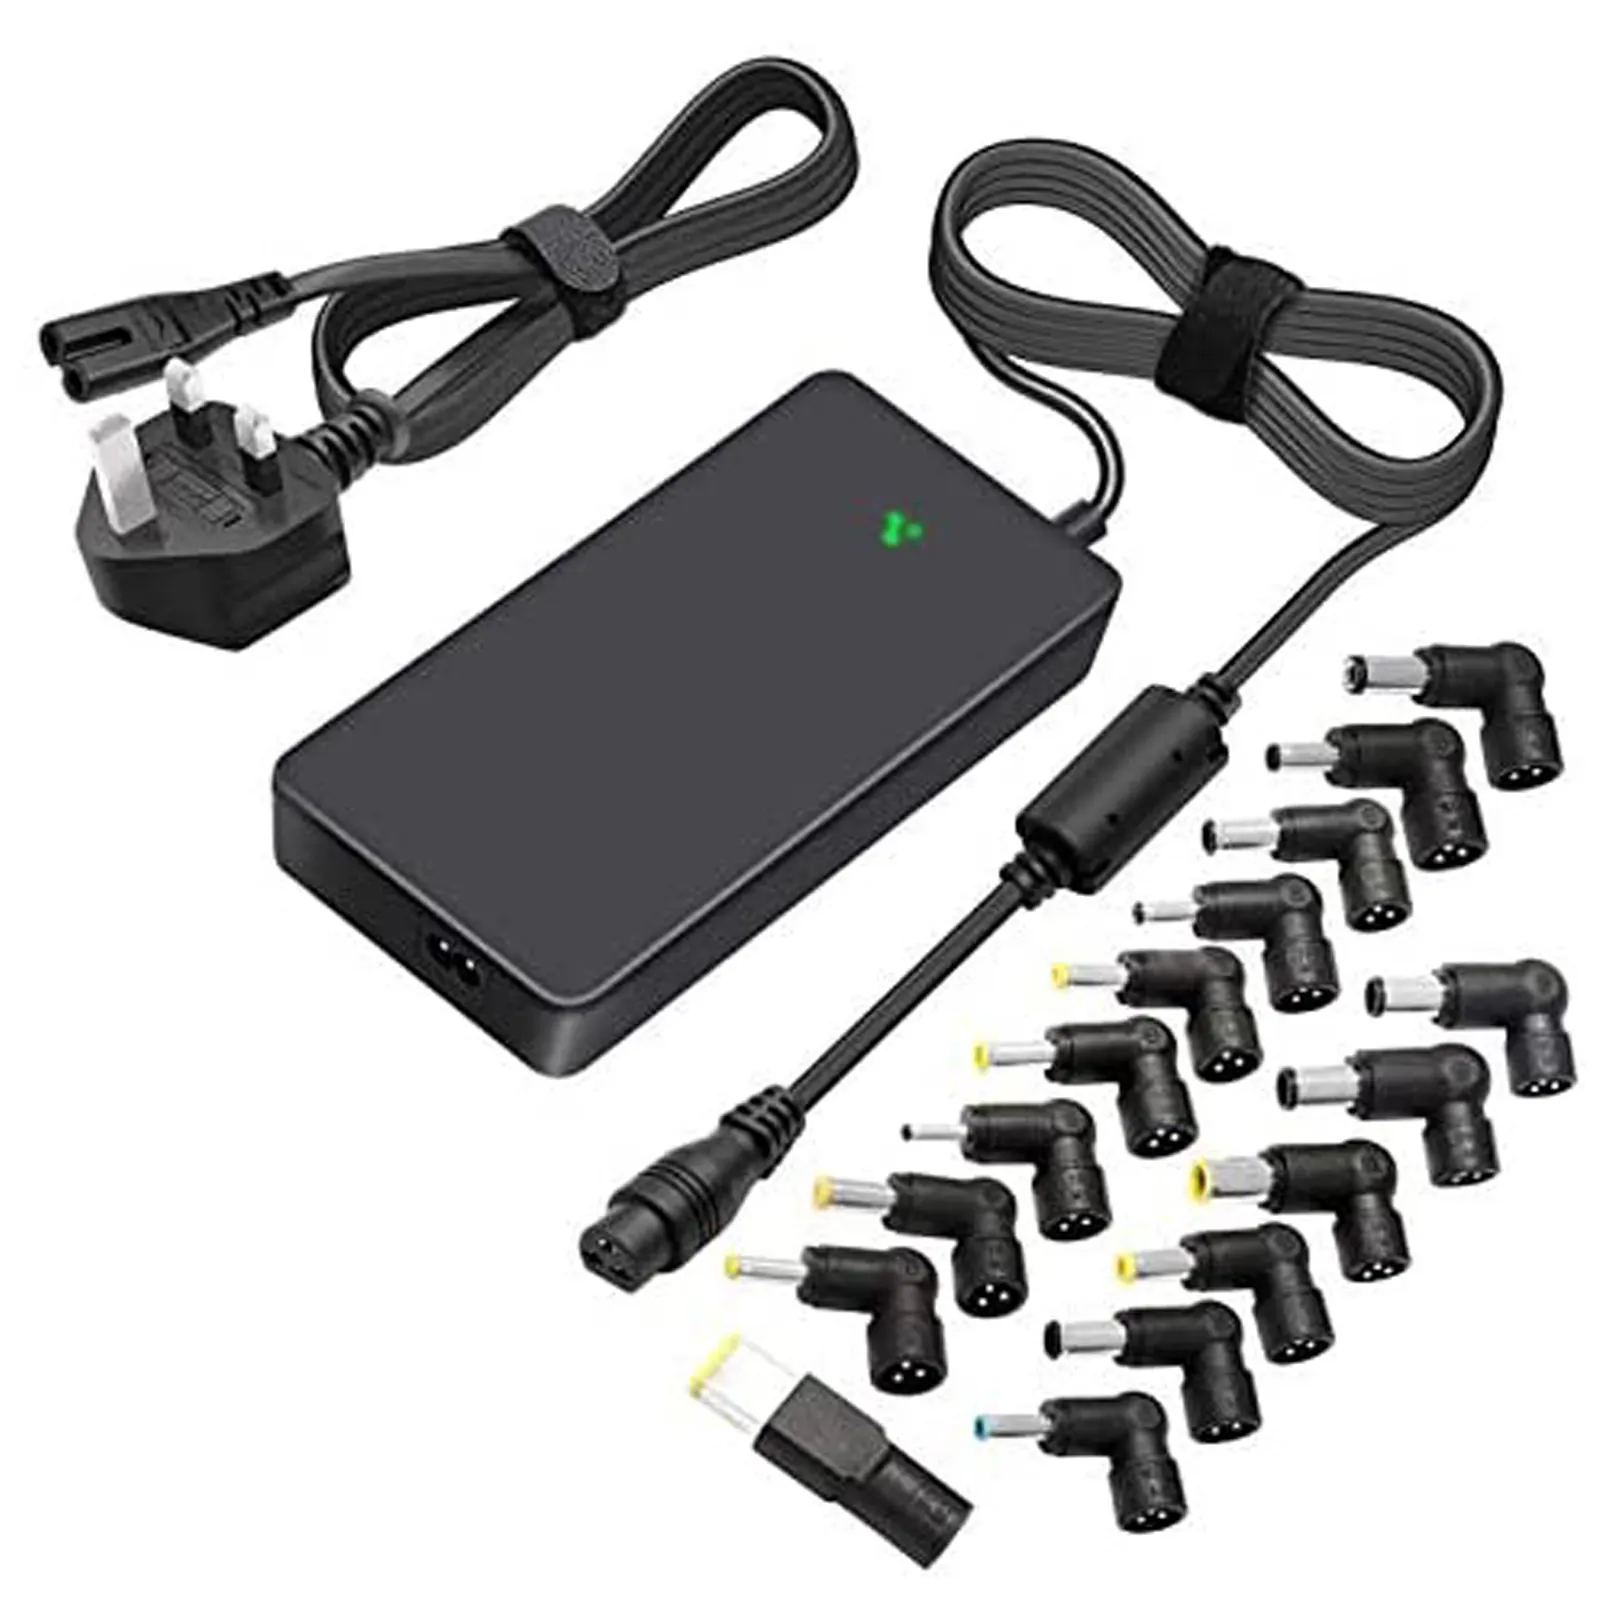 90W 15-20V Laptop-Ladegerät USB-Universal adapter mit 16 Tipps für HP Compaq Dell Acer Asus Toshiba <span class=keywords><strong>IBM</strong></span> Lenovo Samsung <span class=keywords><strong>Sony</strong></span>